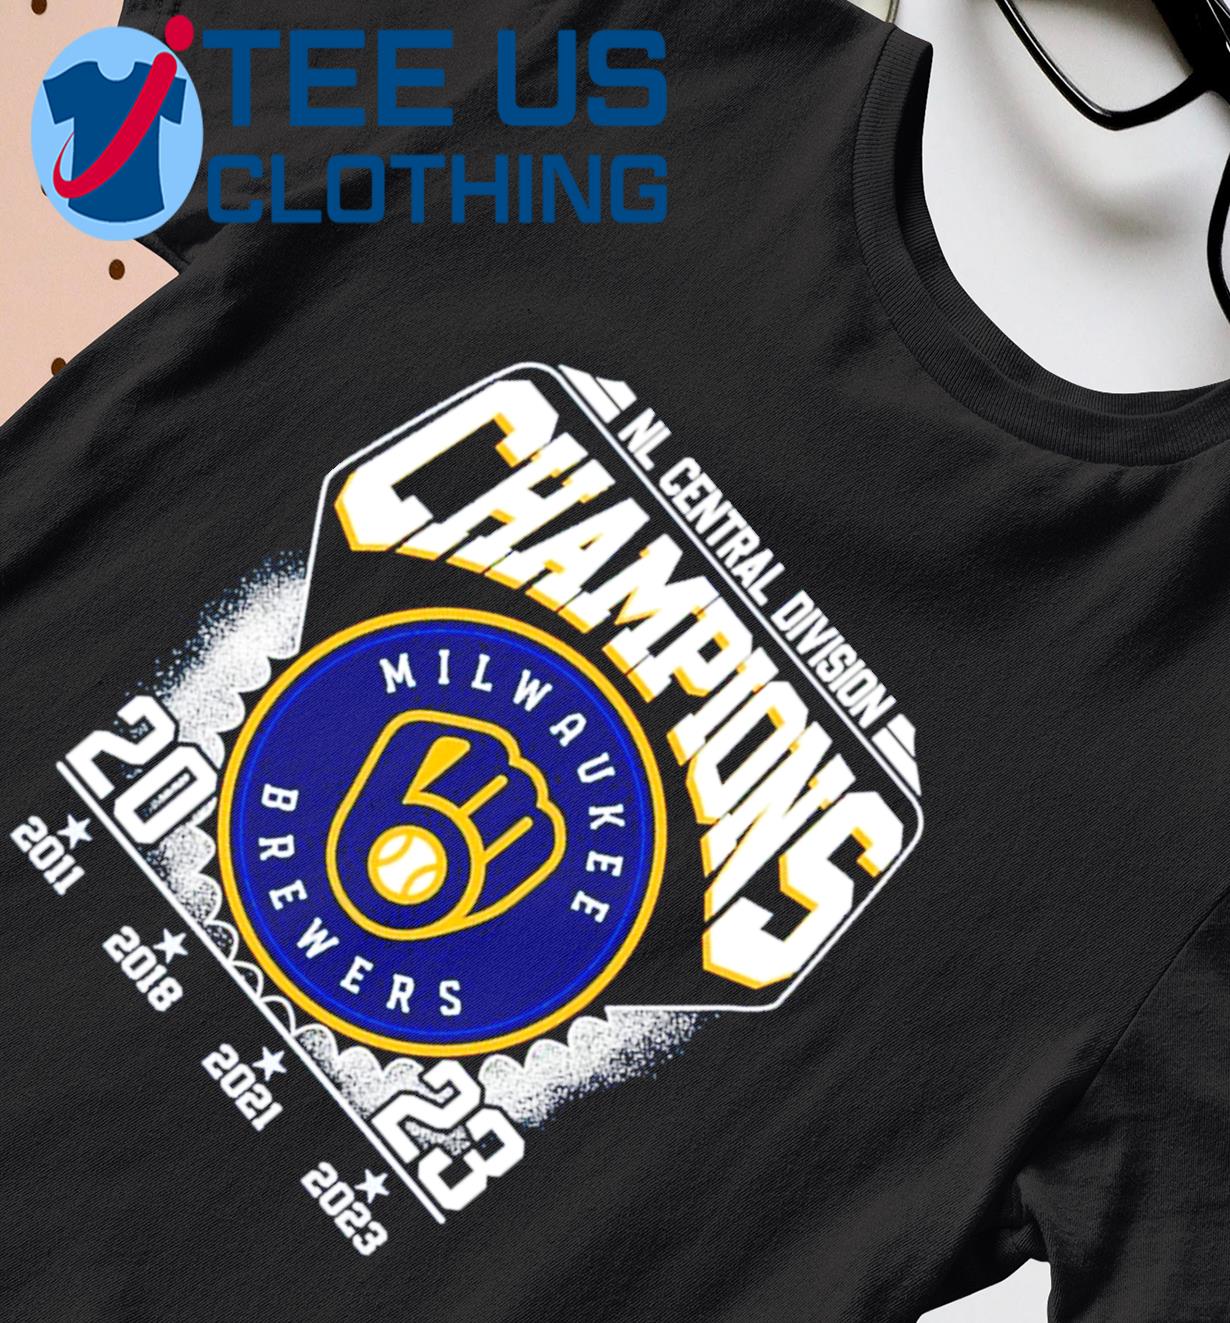 NL Central Division Champions Milwaukee Brewers 2011 2018 2021 2023 T-Shirt,  hoodie, sweater, long sleeve and tank top